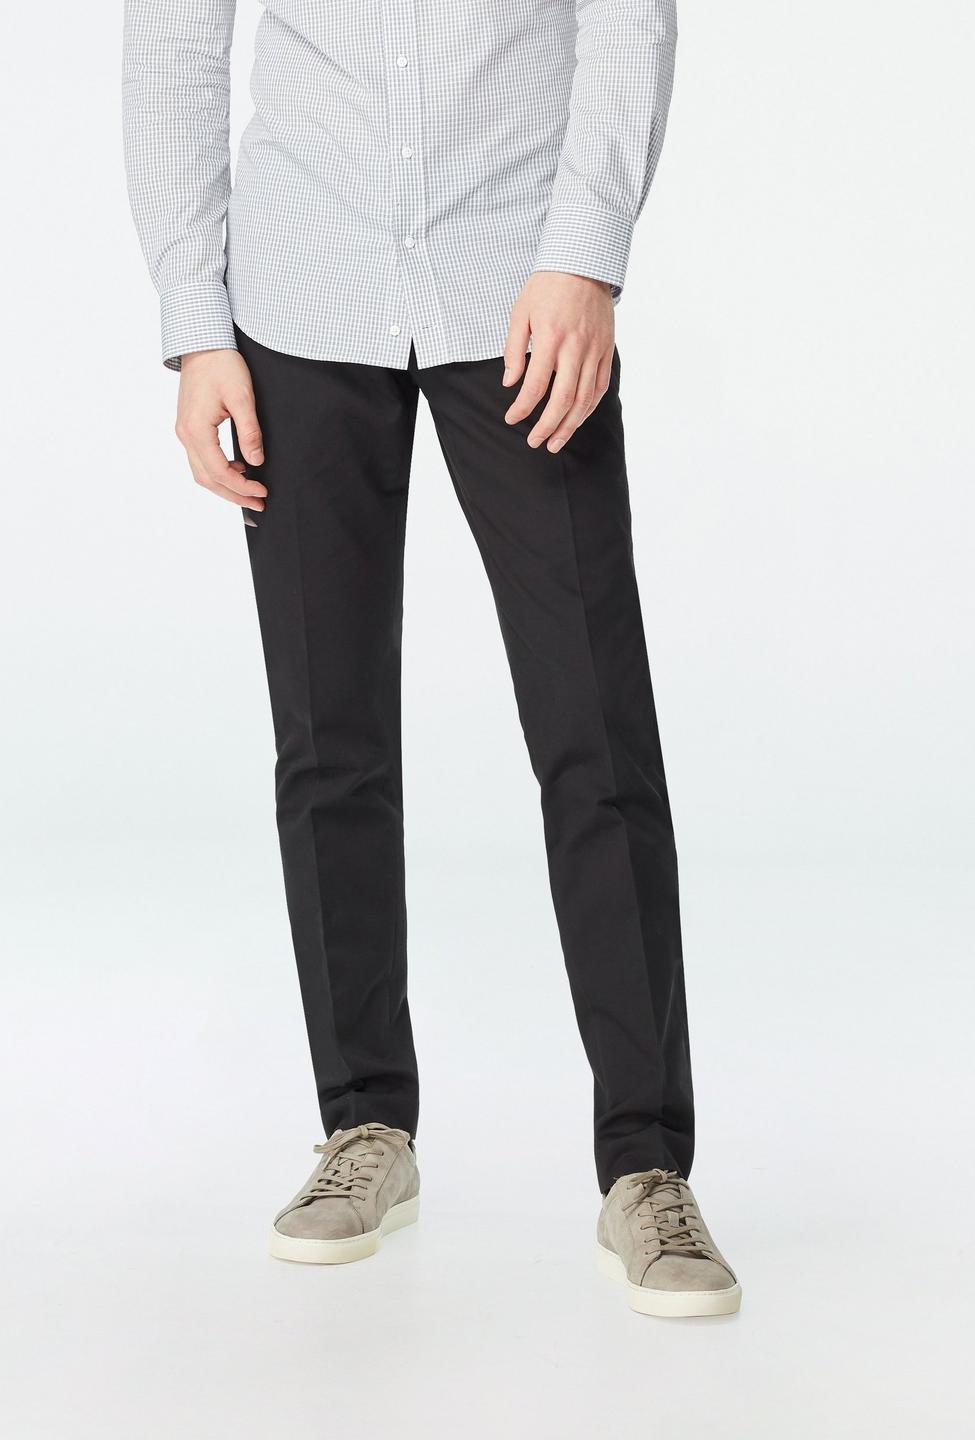 Black pants - Houndslow Solid Design from Premium Indochino Collection